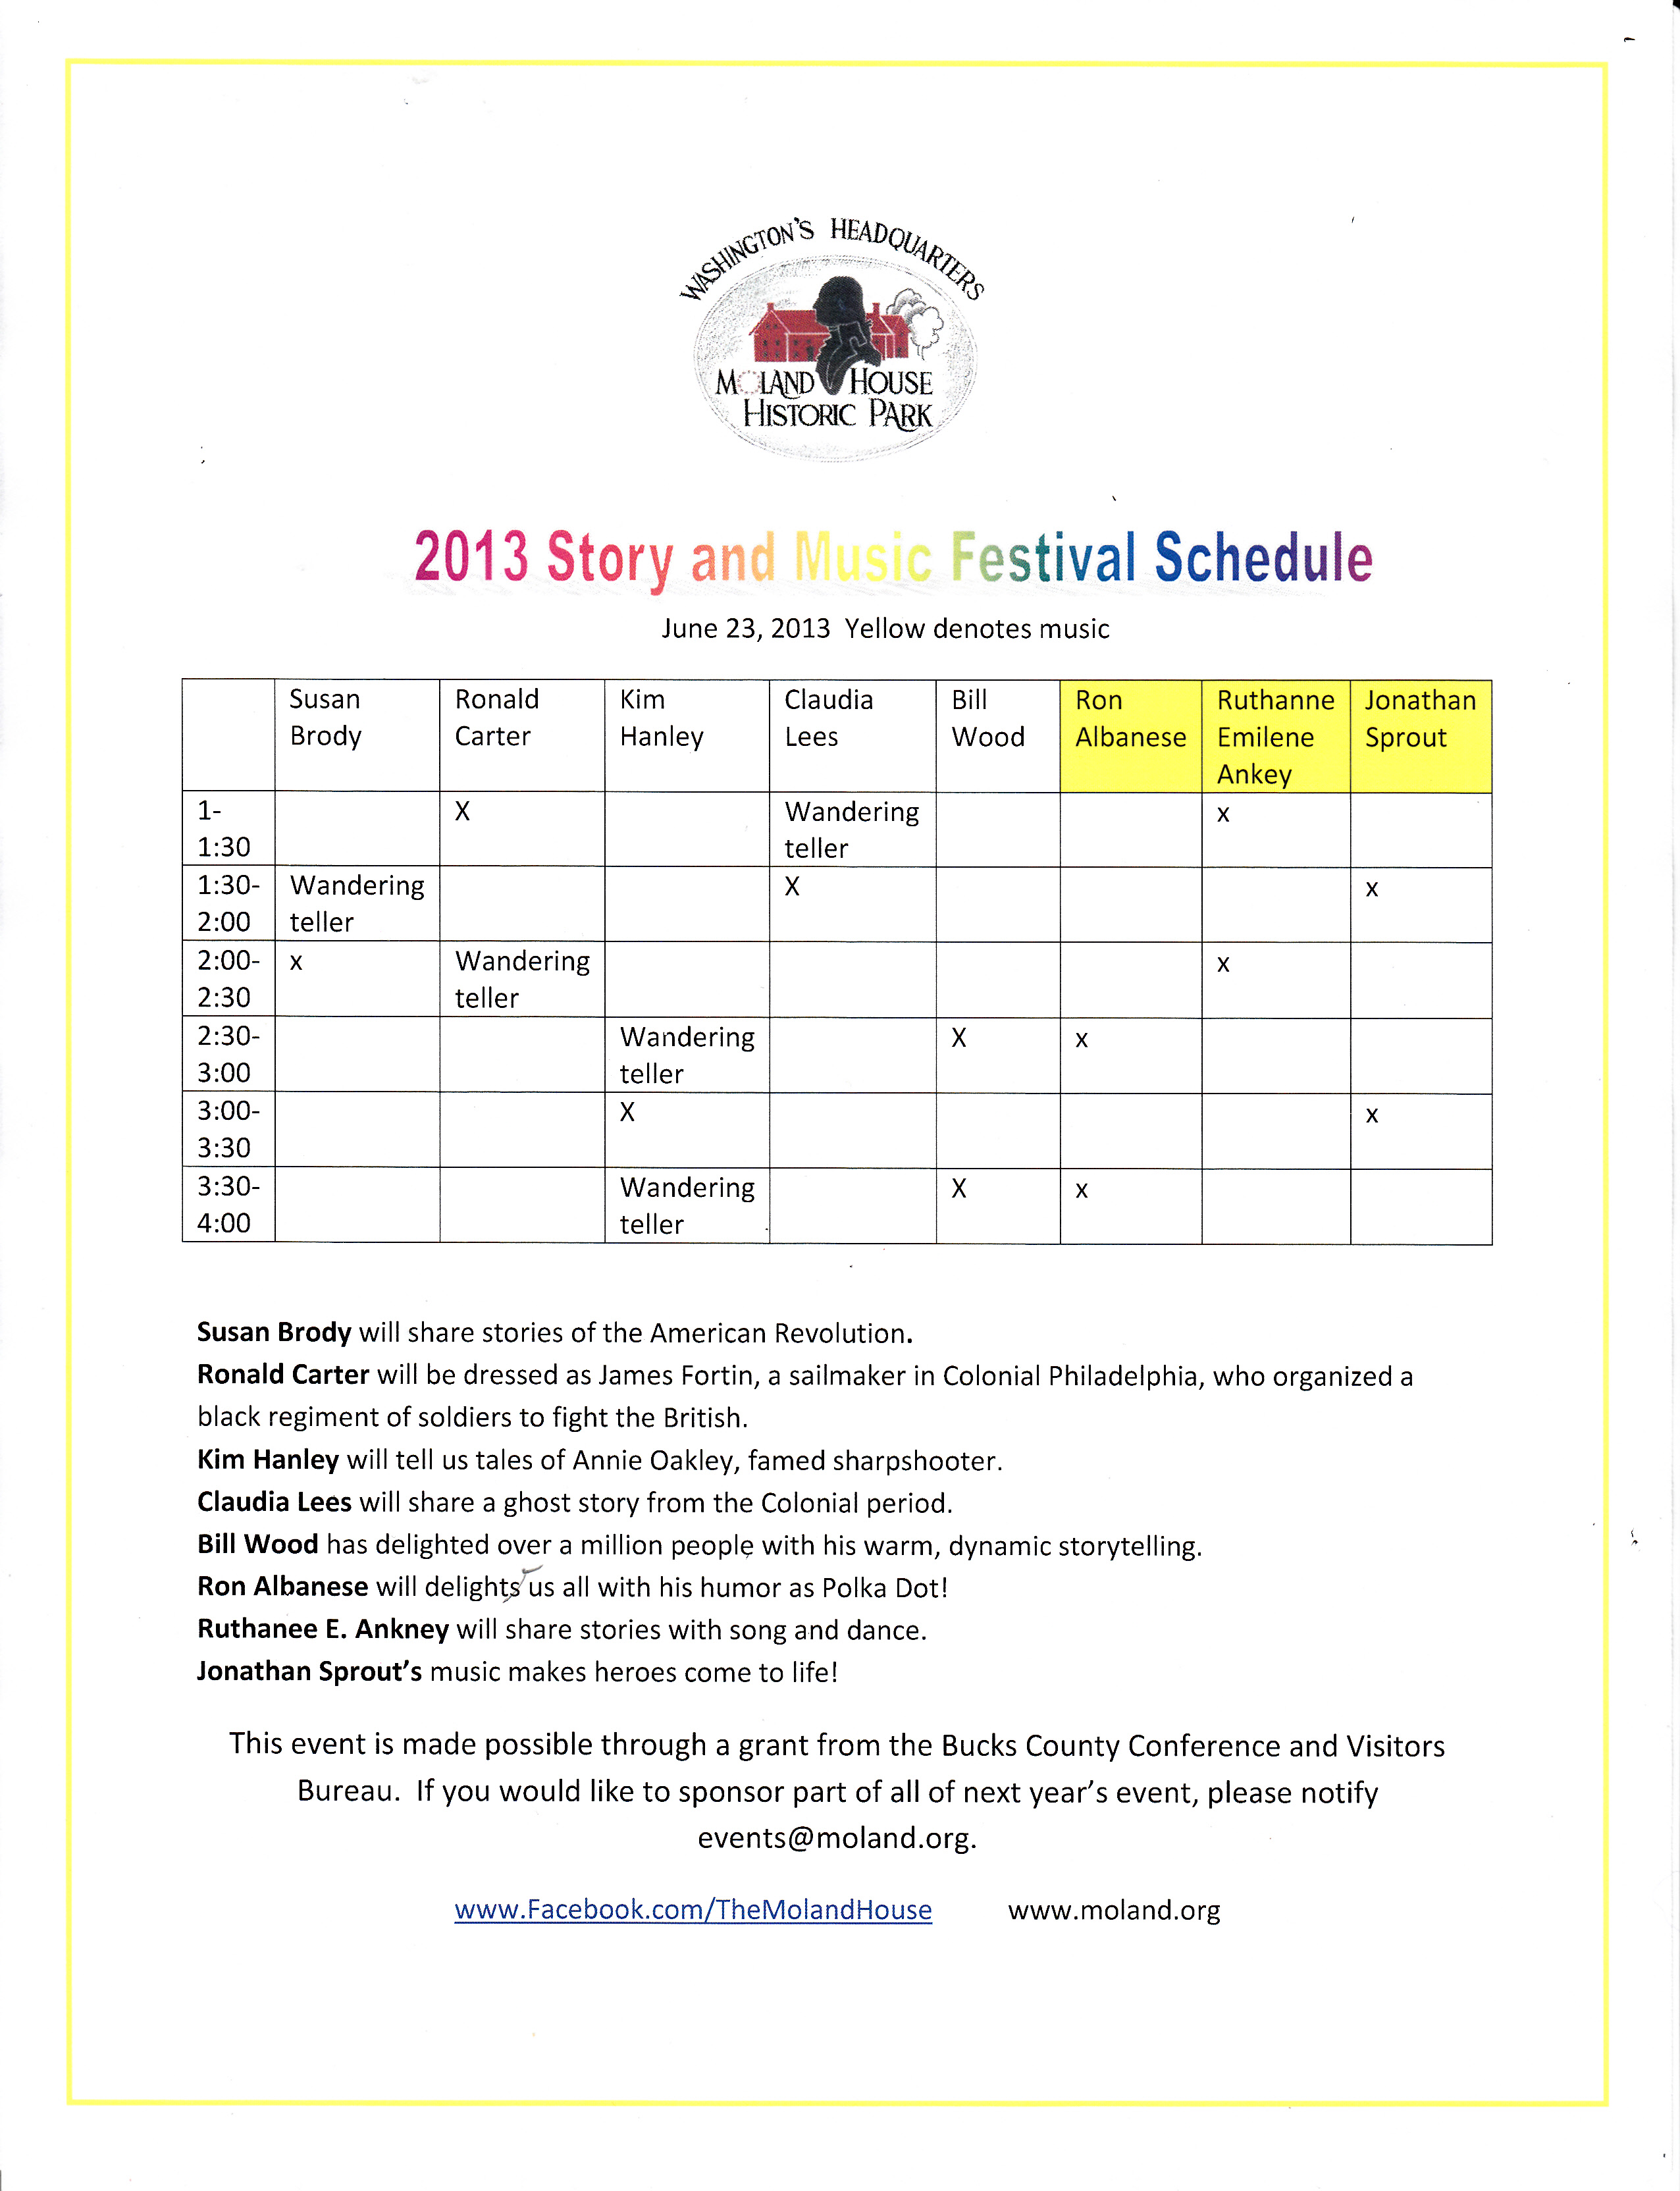 Story and Music Festival 2013 schedule